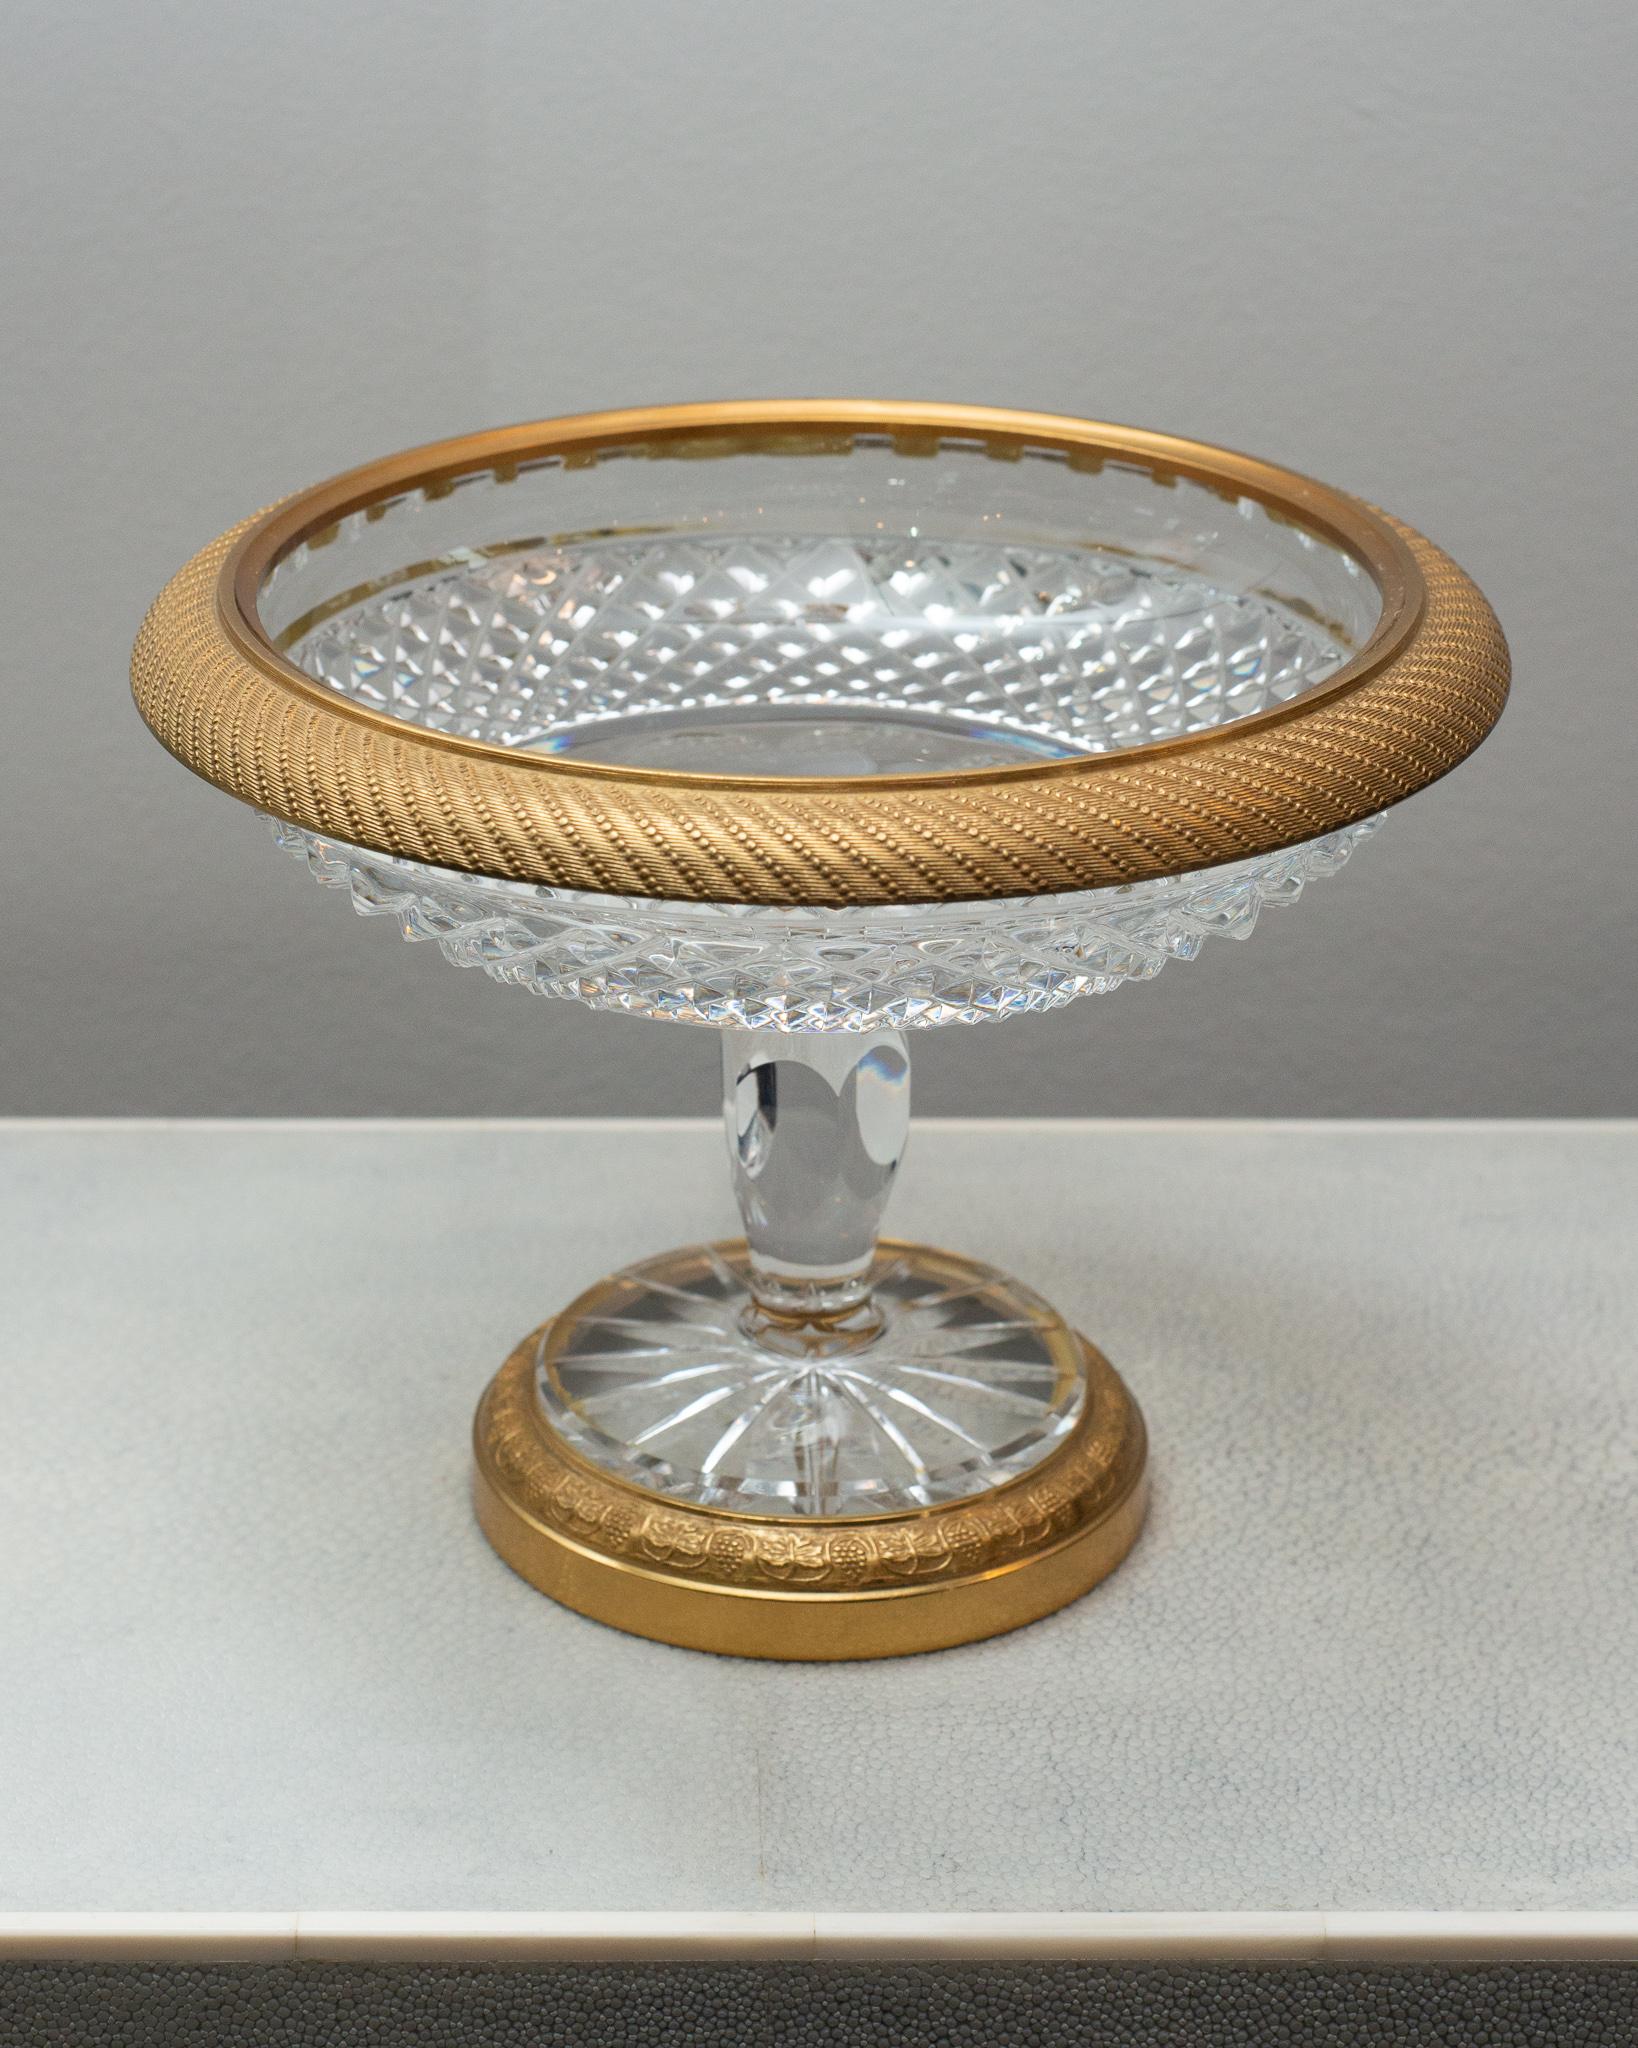 A stunning and beautifully made antique French cut crystal and bronze tazza, made circa 1900. Bronze trims are in excellent condition for their age and the elaborate hand cut crystal catches the light.